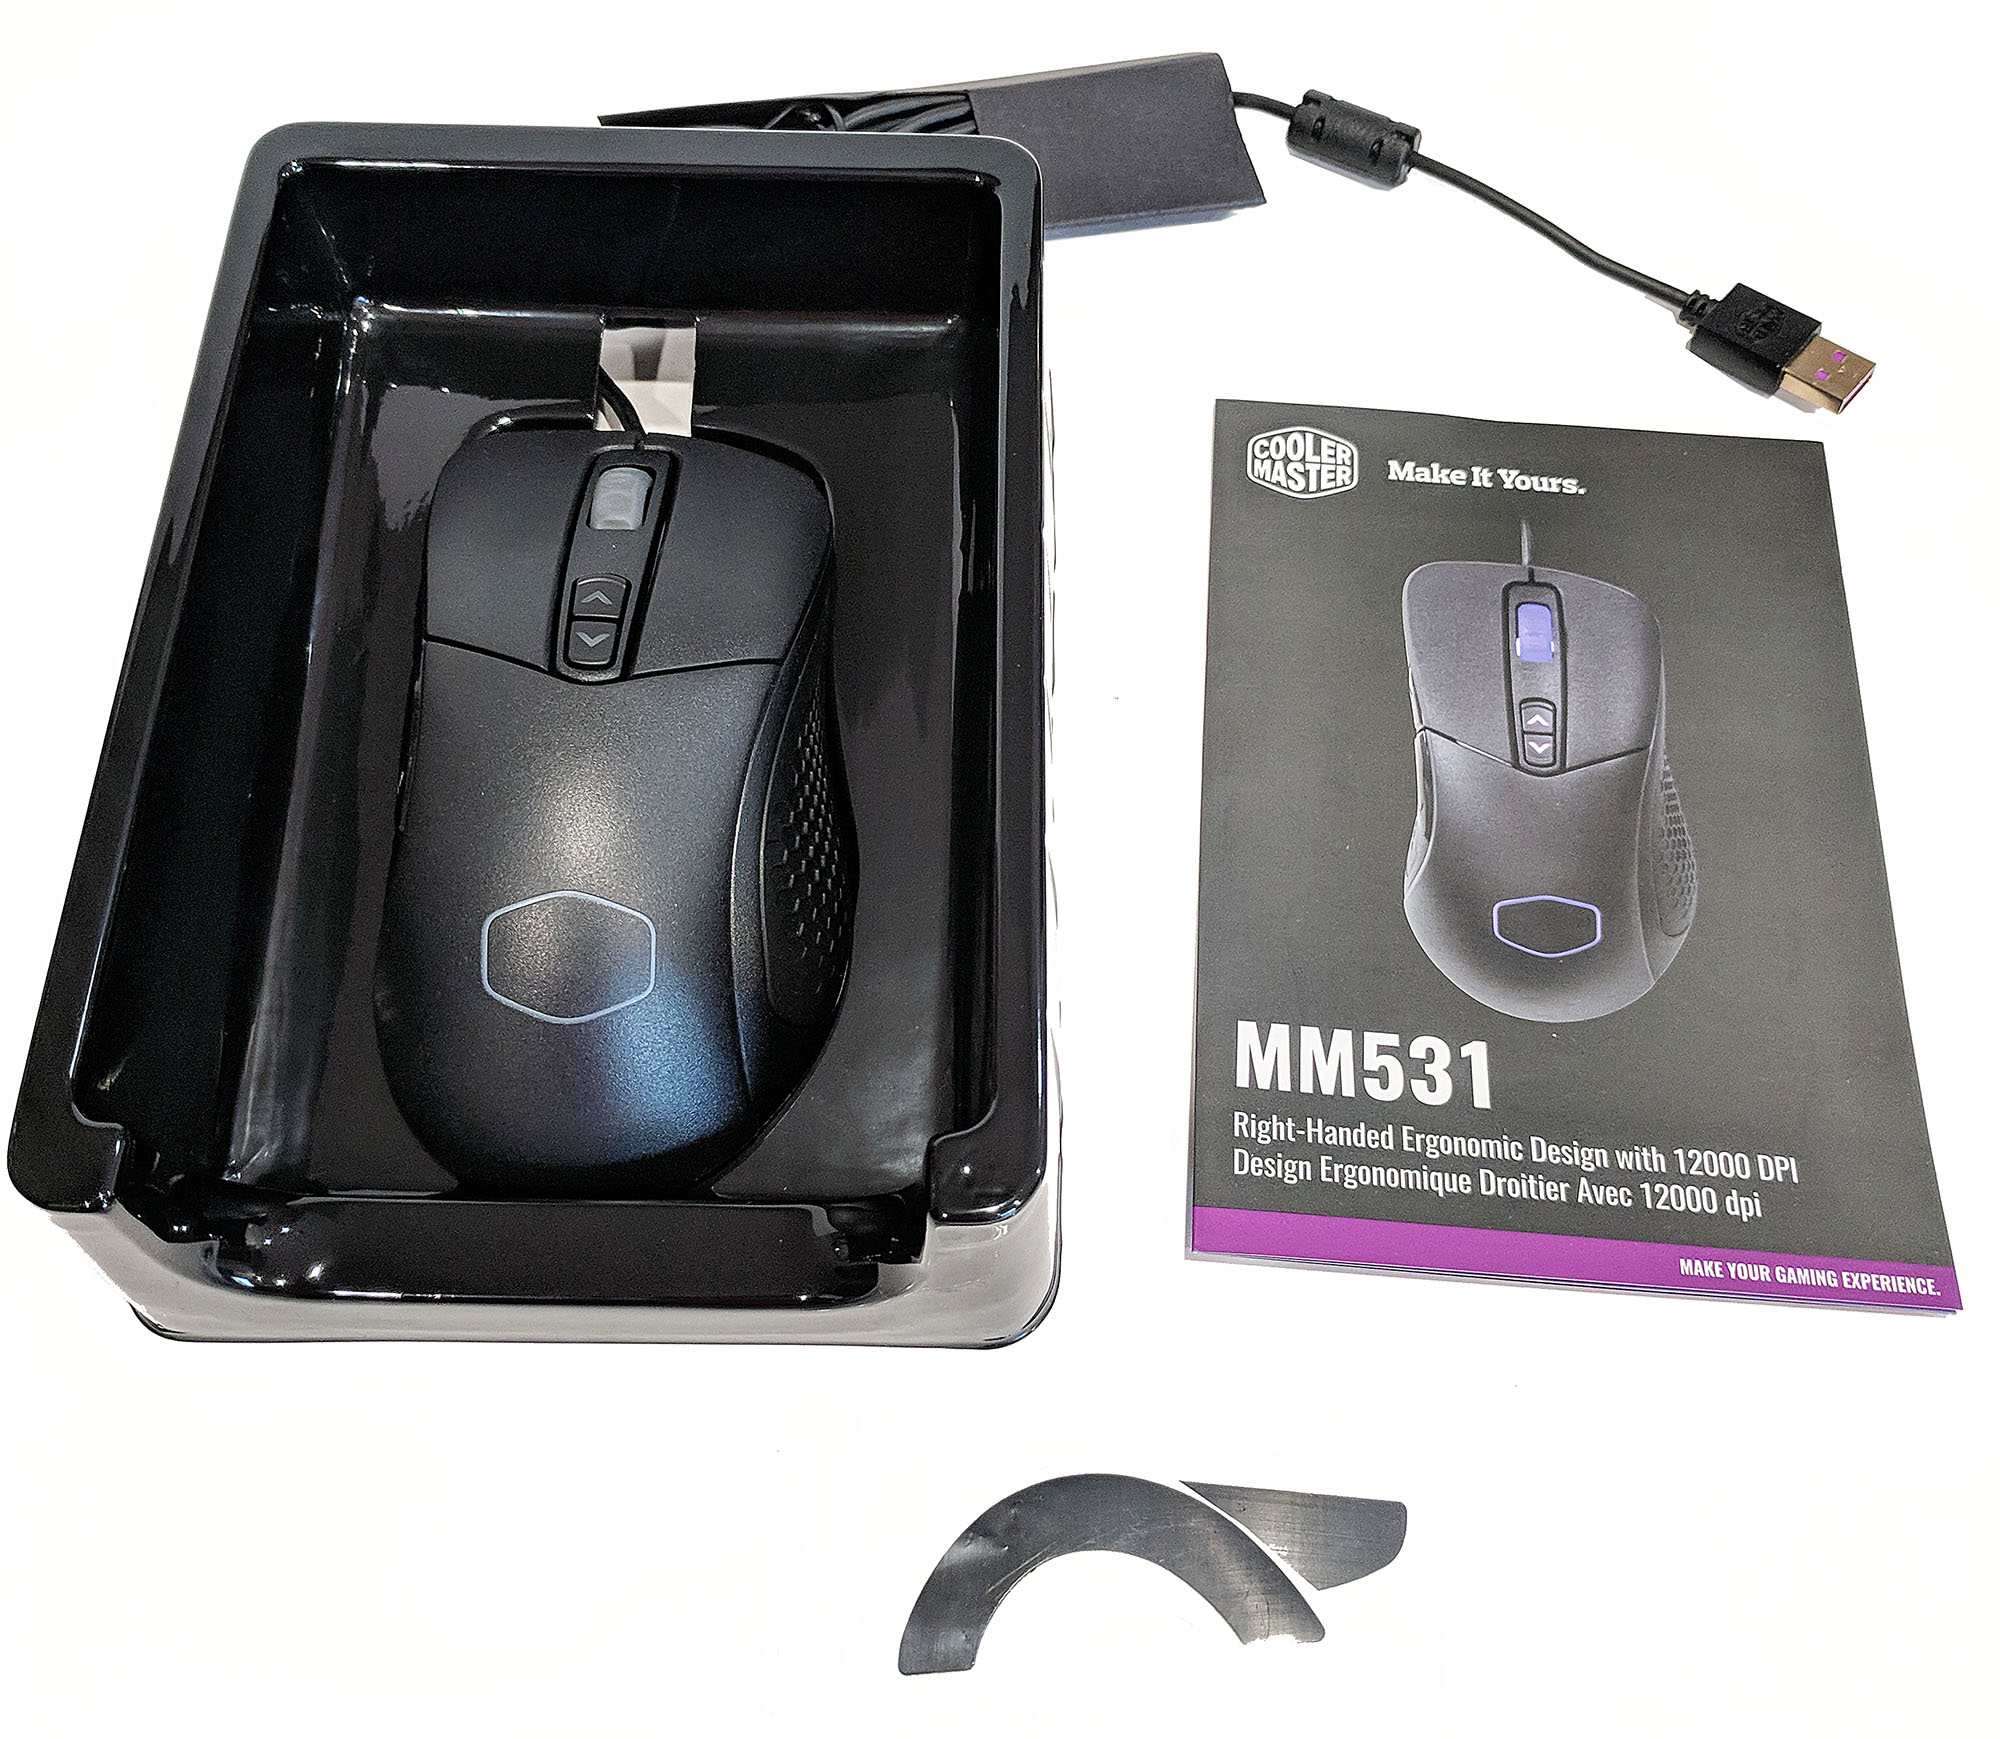 Cooler Master MasterMouse MM530 Review